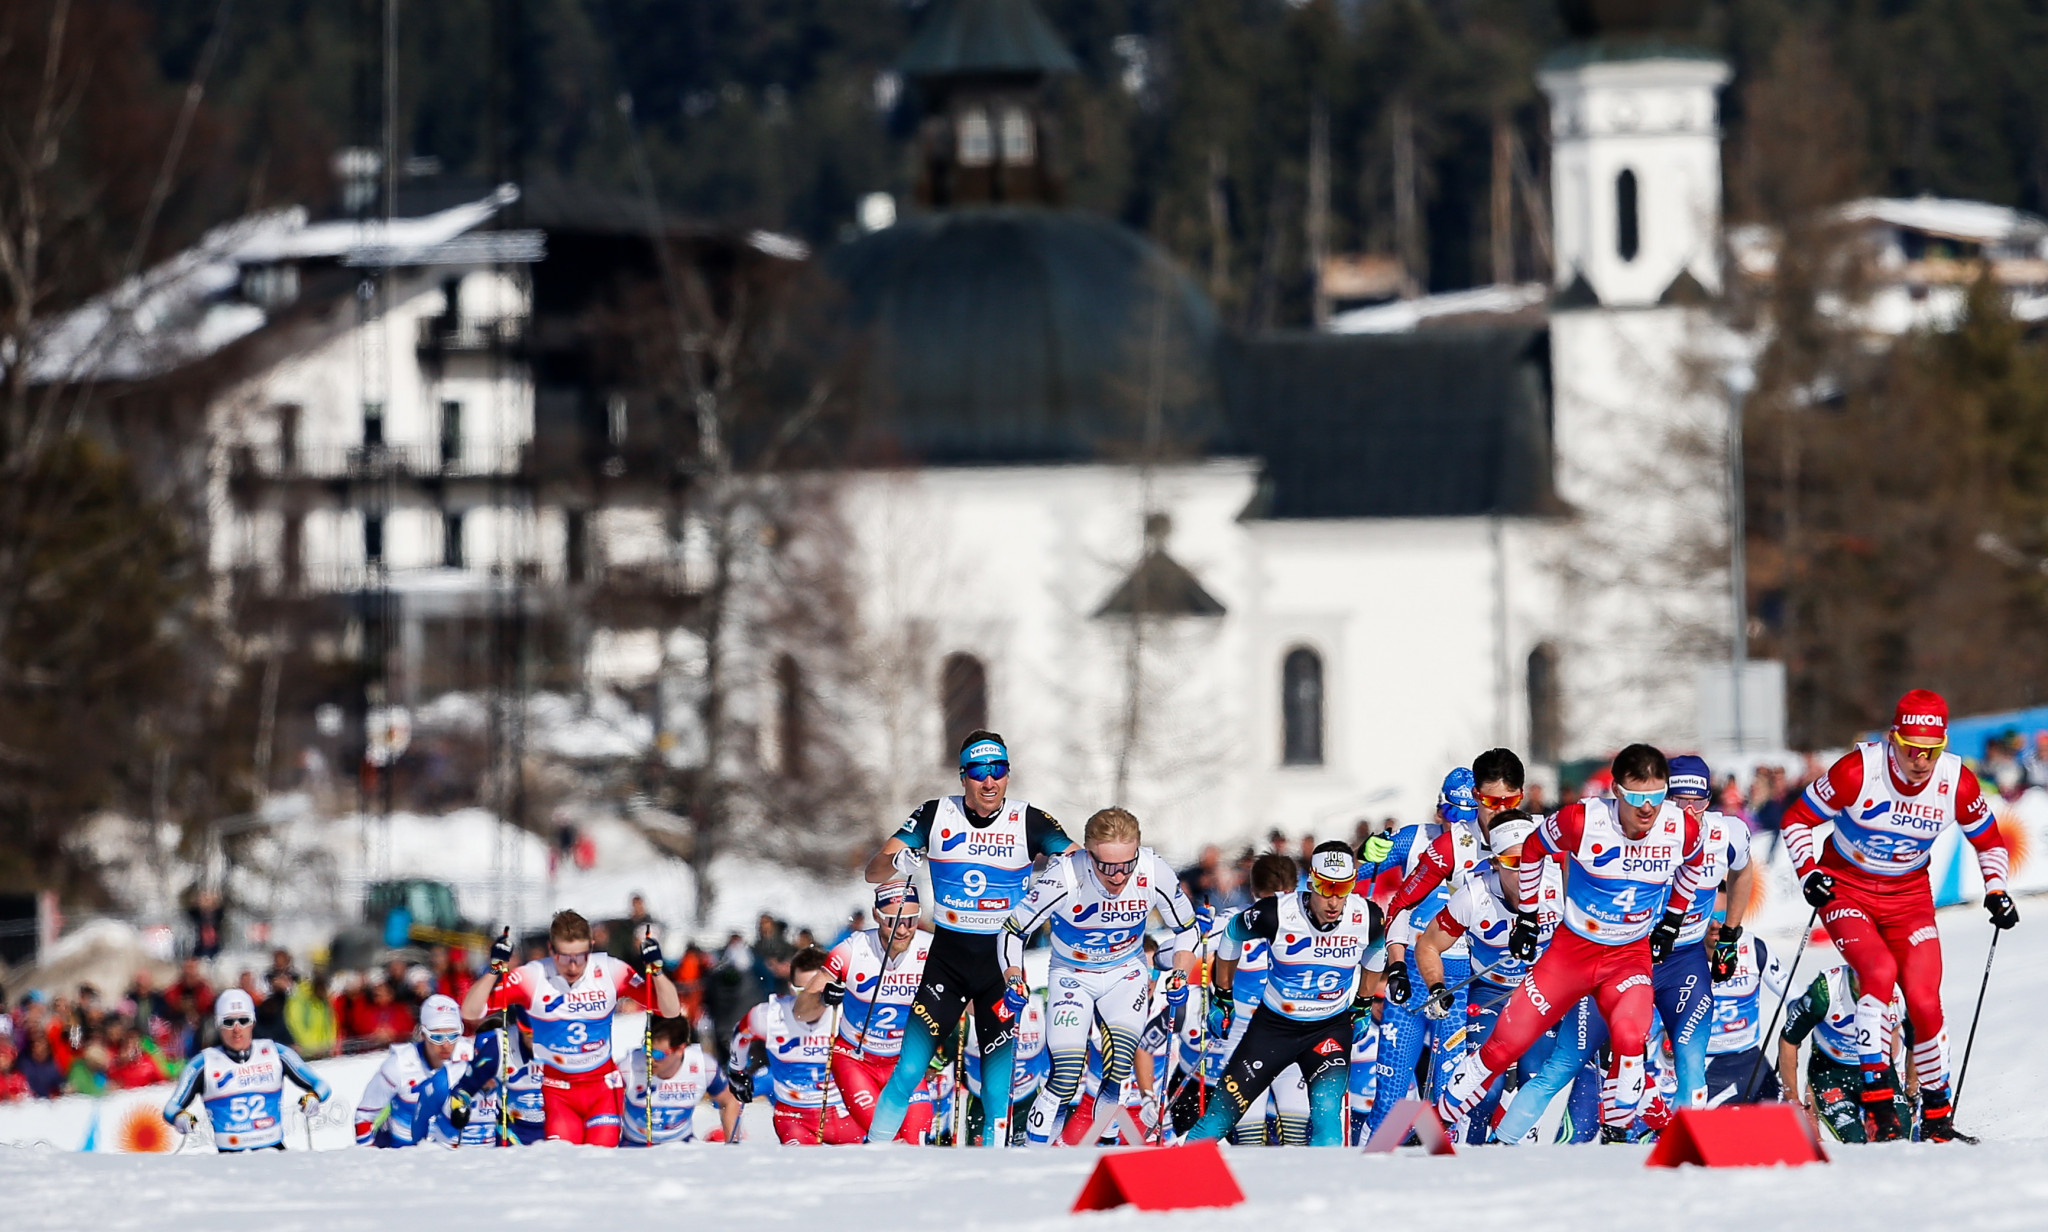 Crowds gathered for the final event of the 2019 Nordic World Ski Championships ©Getty Images